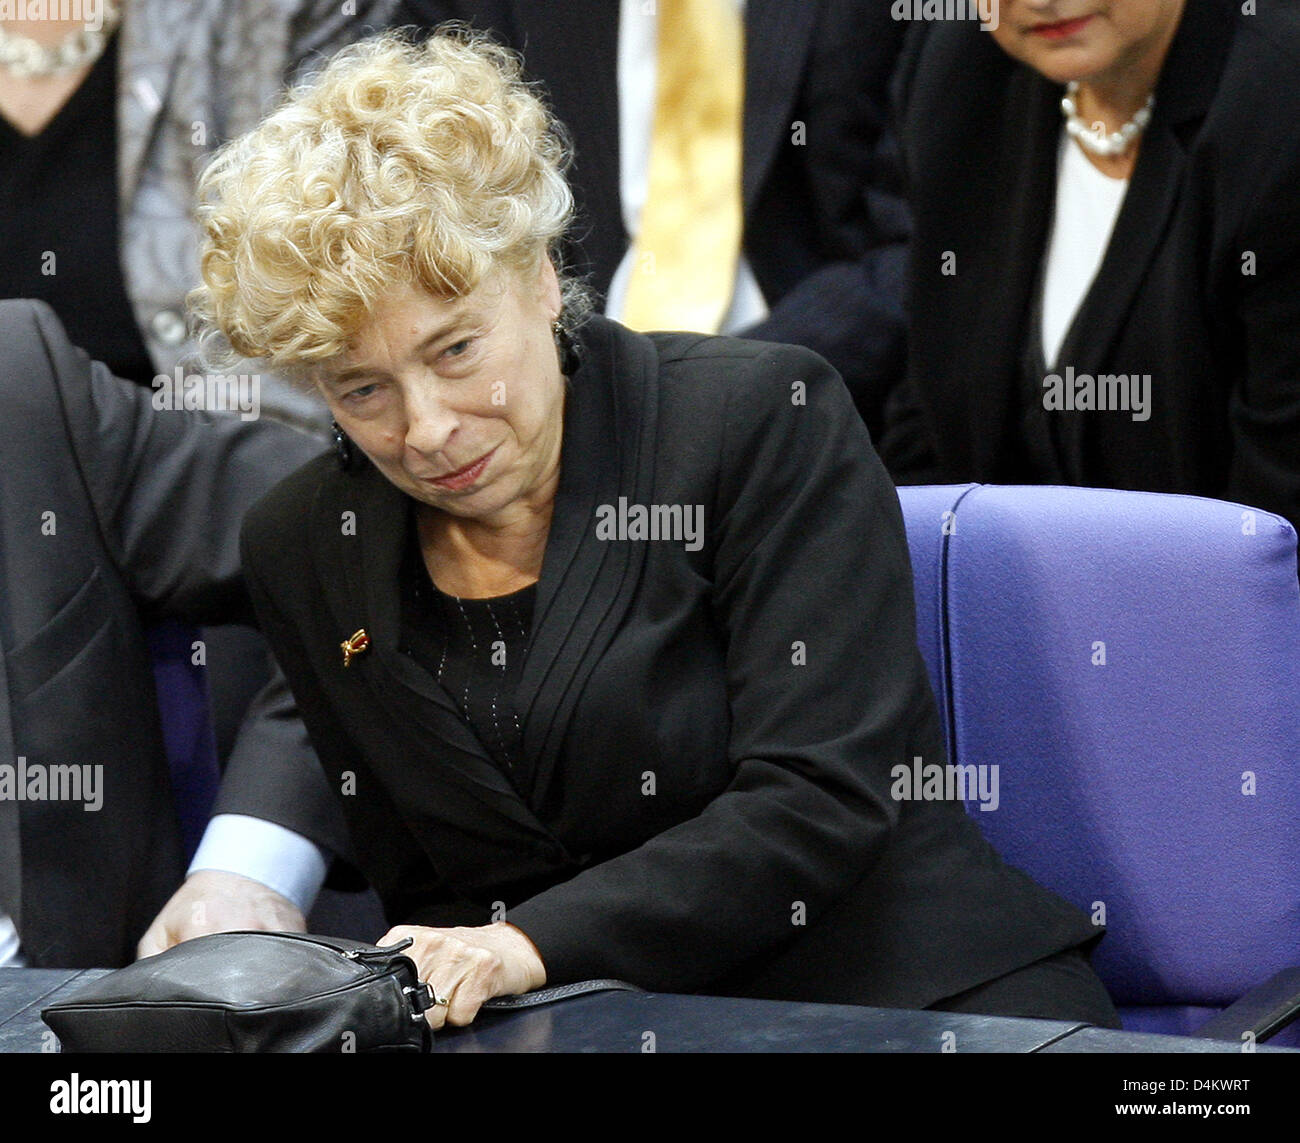 Candidate of the SPD Gesine Schwan reacts to the reelection of Federal German President Koehler at the 13th Federal Convention in the plenar hall of the Reichstag building in Berlin, Germany, 23 May 2009. Koehler won the election with 613 votes, the minimum number of necessary votes. Photo: WOLFGANG KUMM Stock Photo